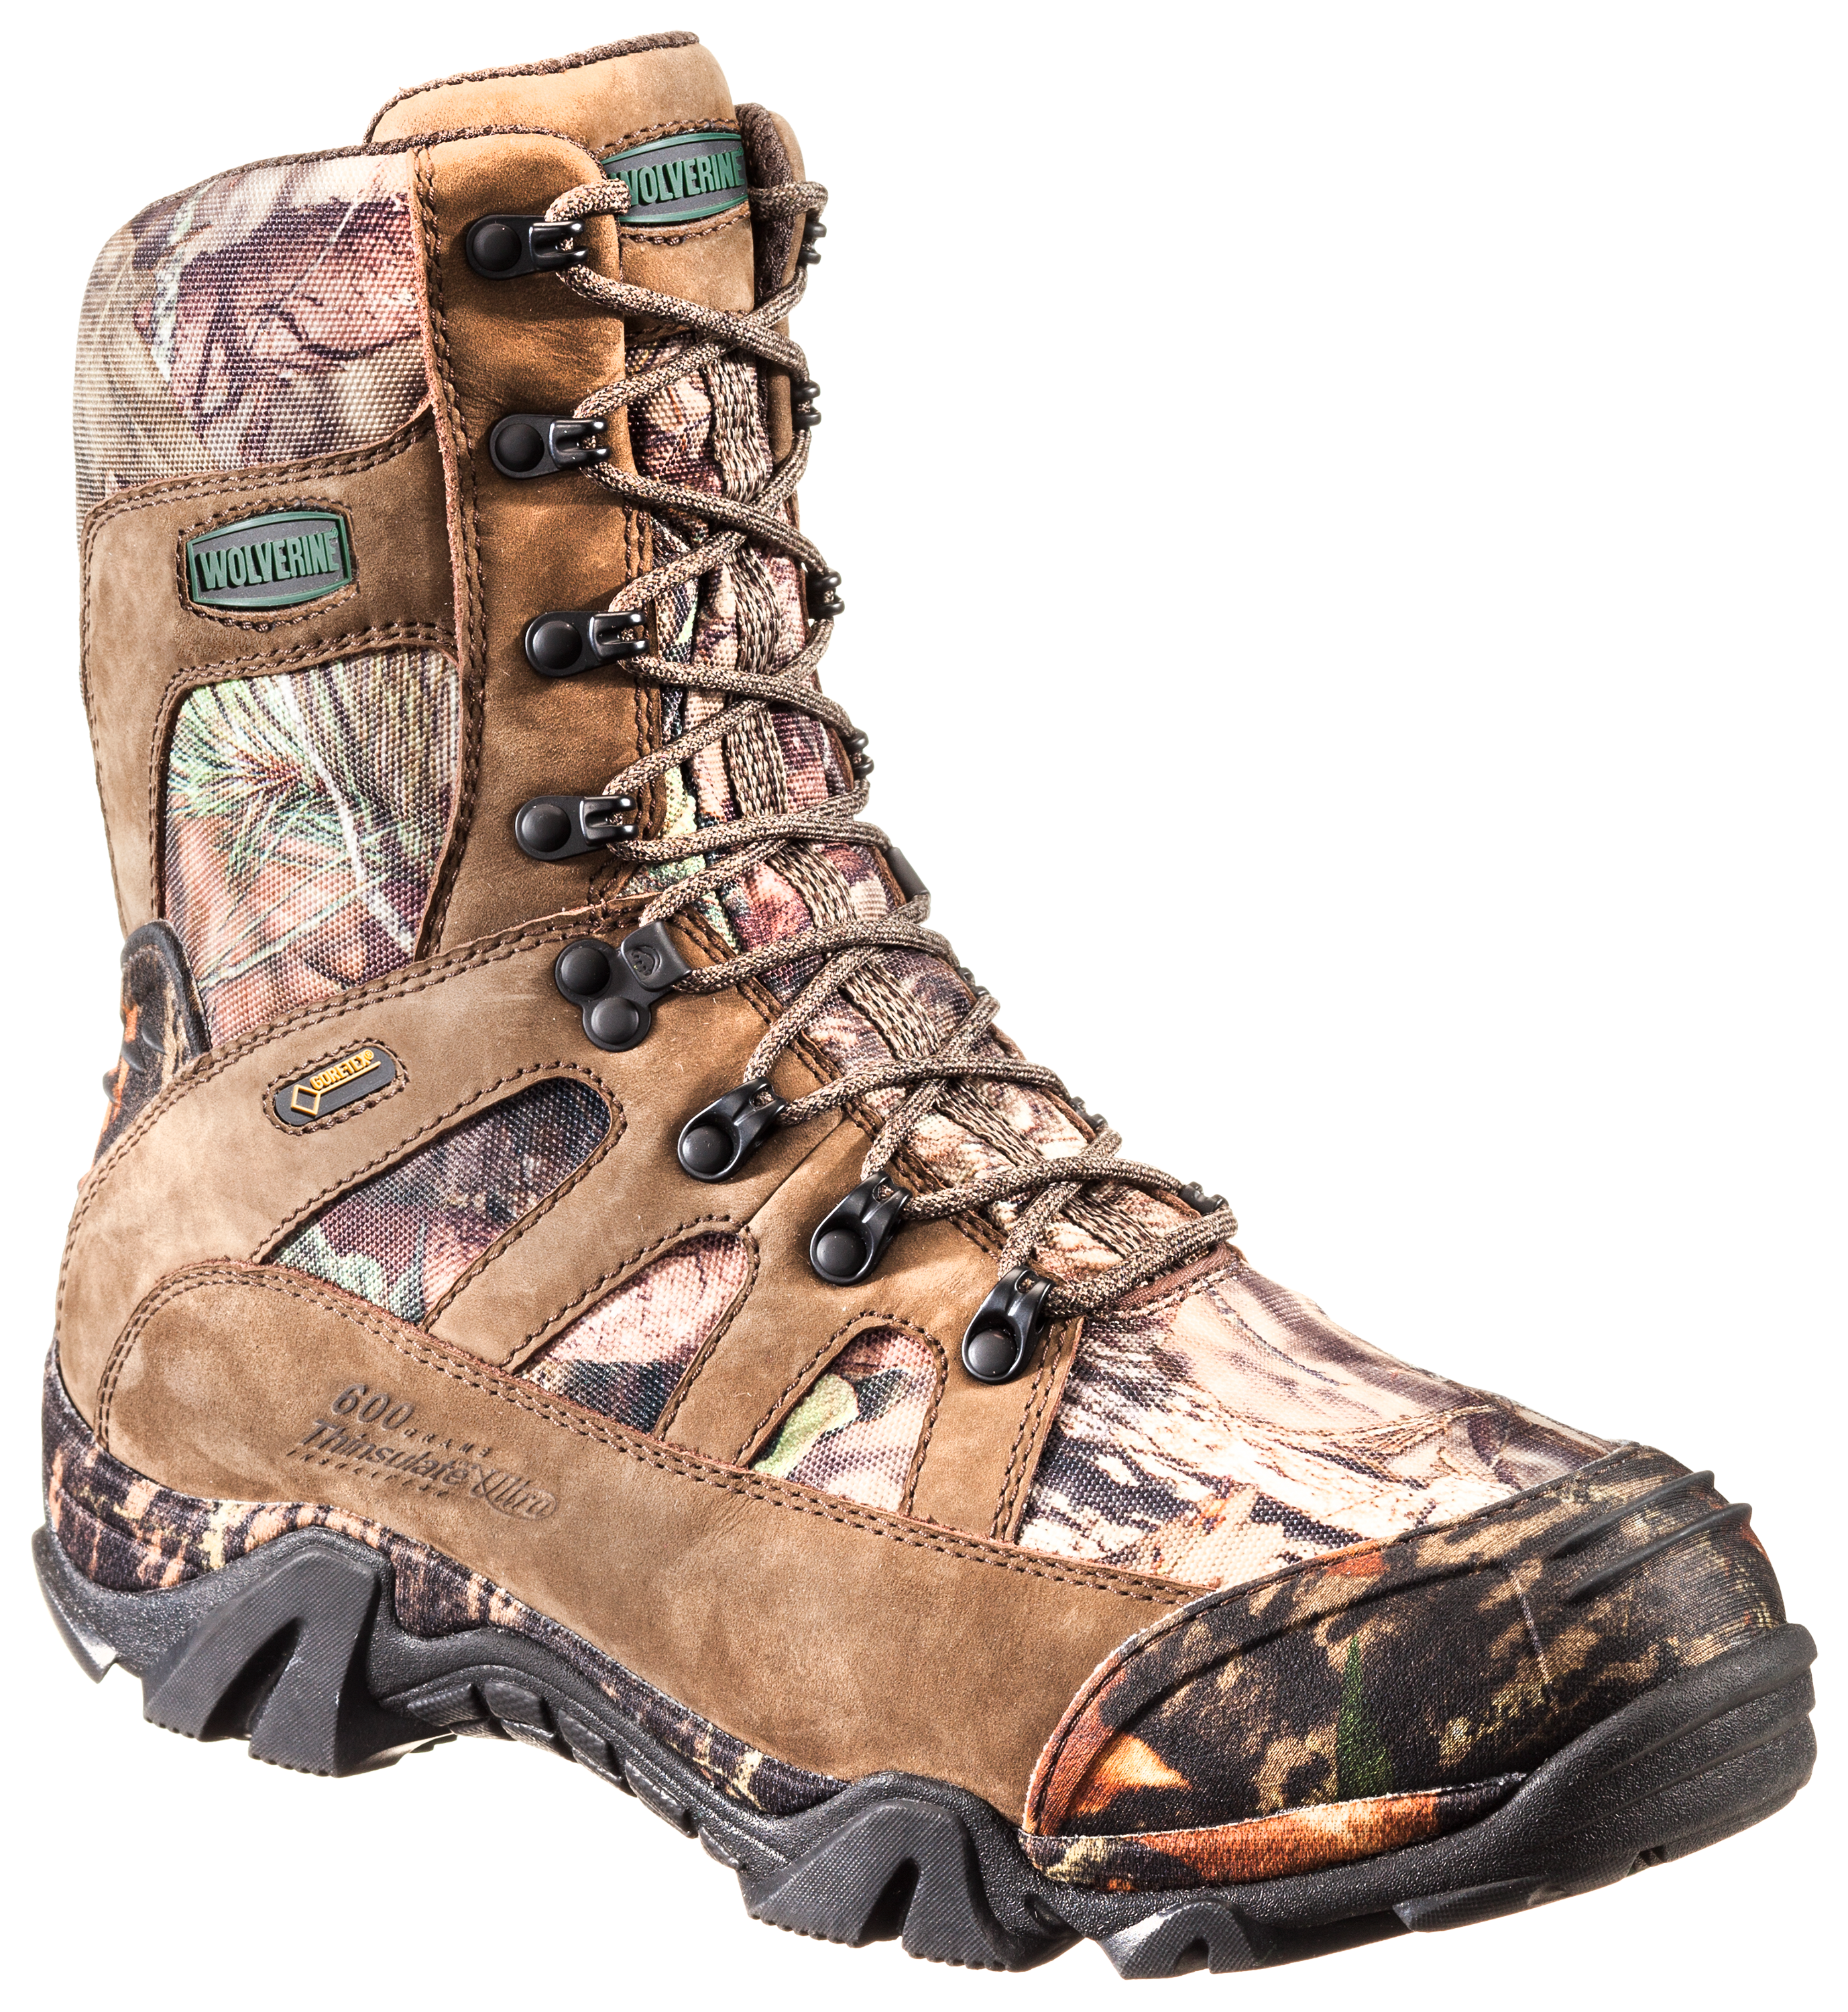 Wolverine Extreme Country GORE-TEX Insulated Hunting Boots for Men ...